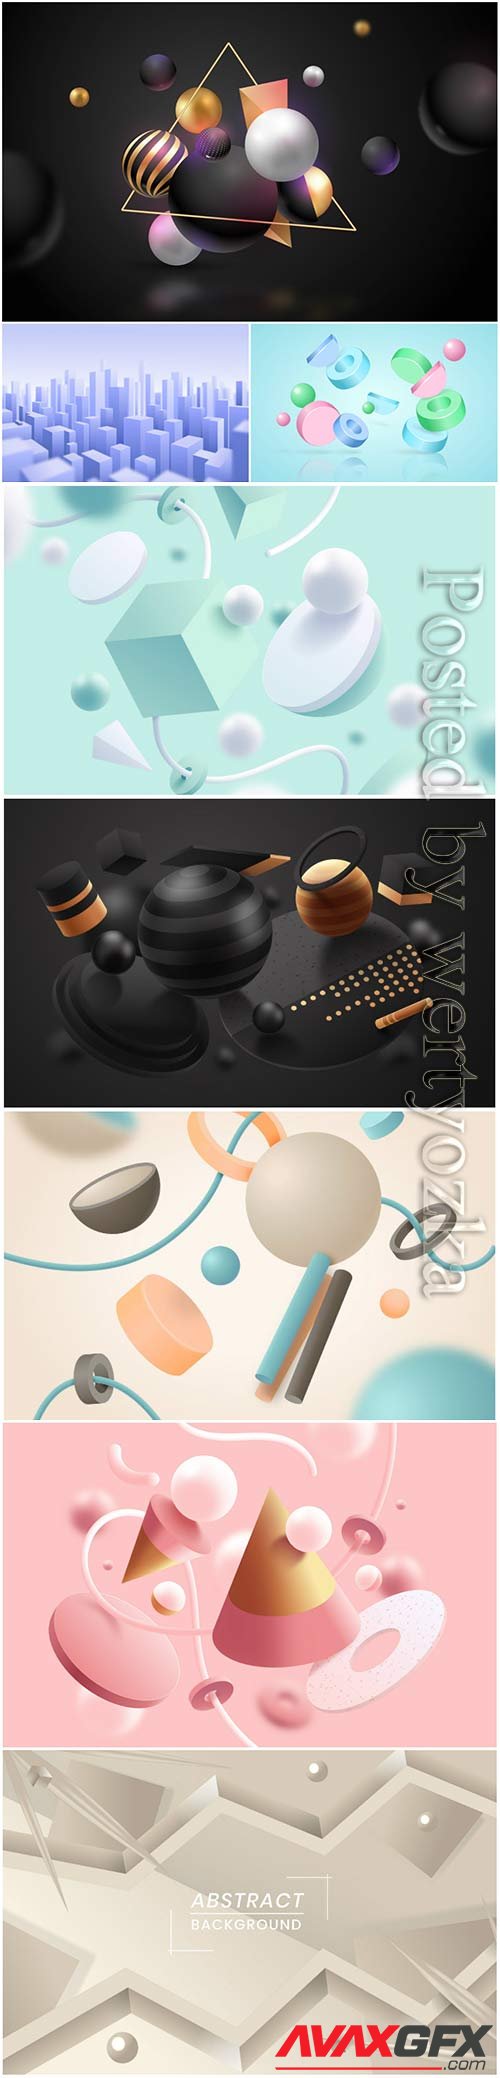 Abstract vector background, 3d models template # 5